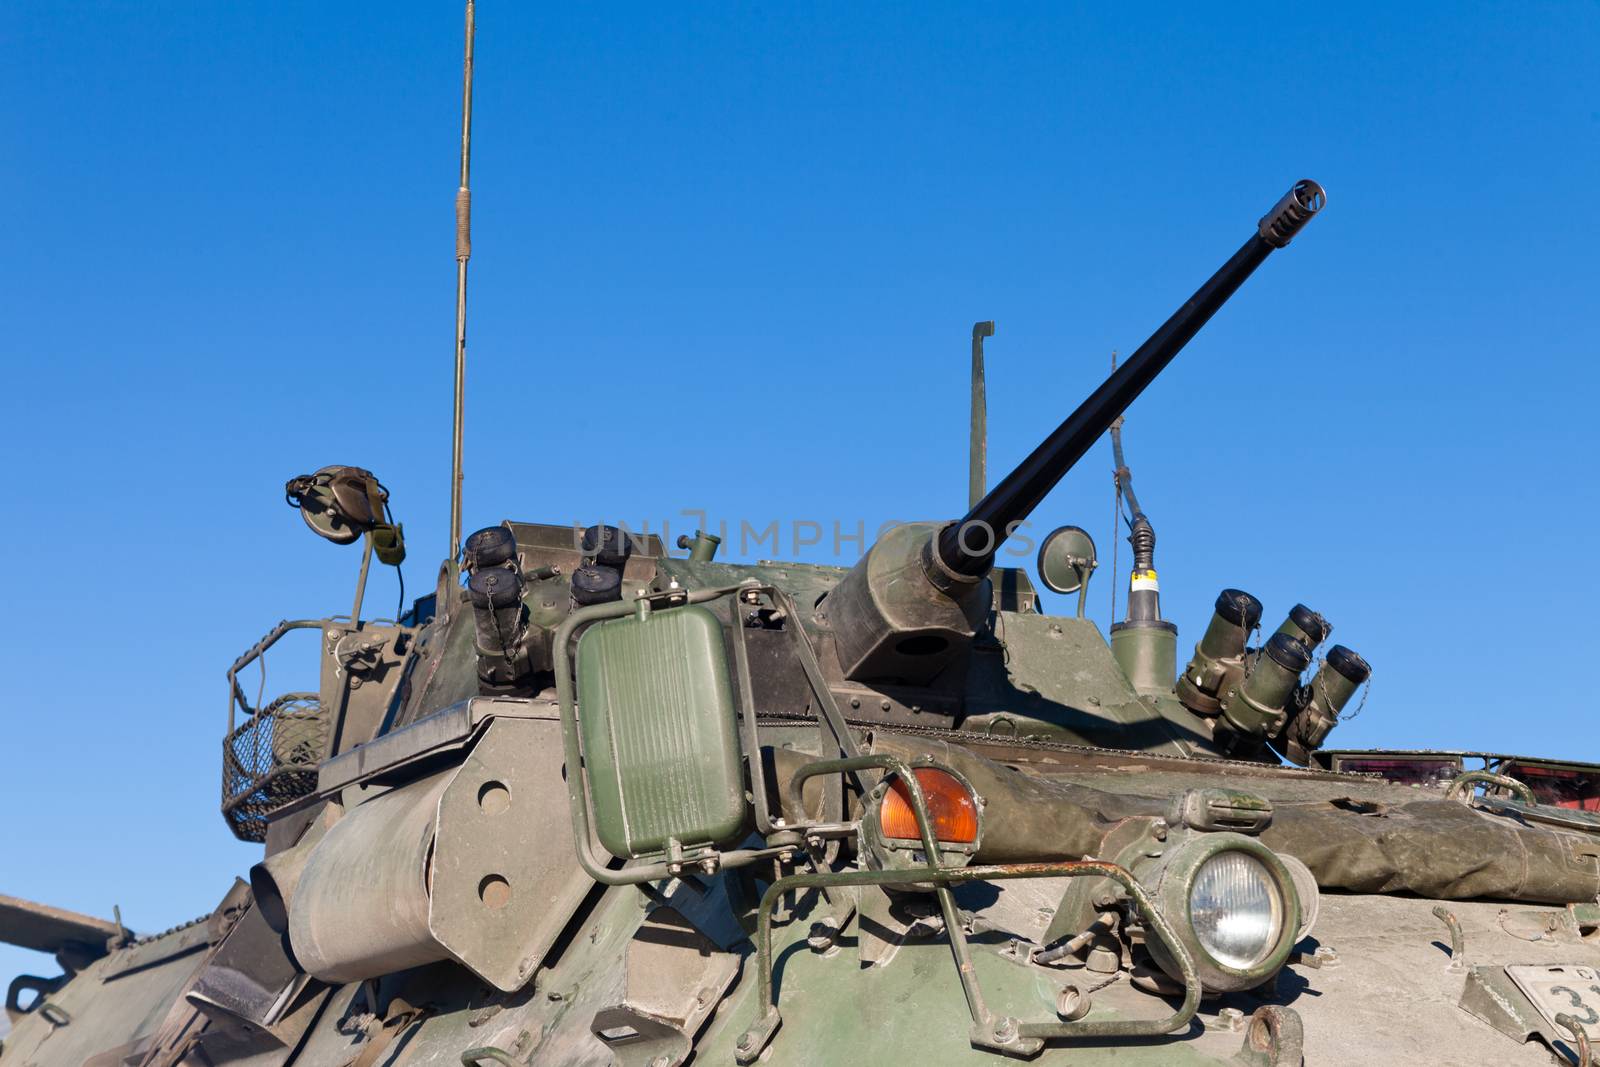 Operational military armored tank turret gun by PiLens